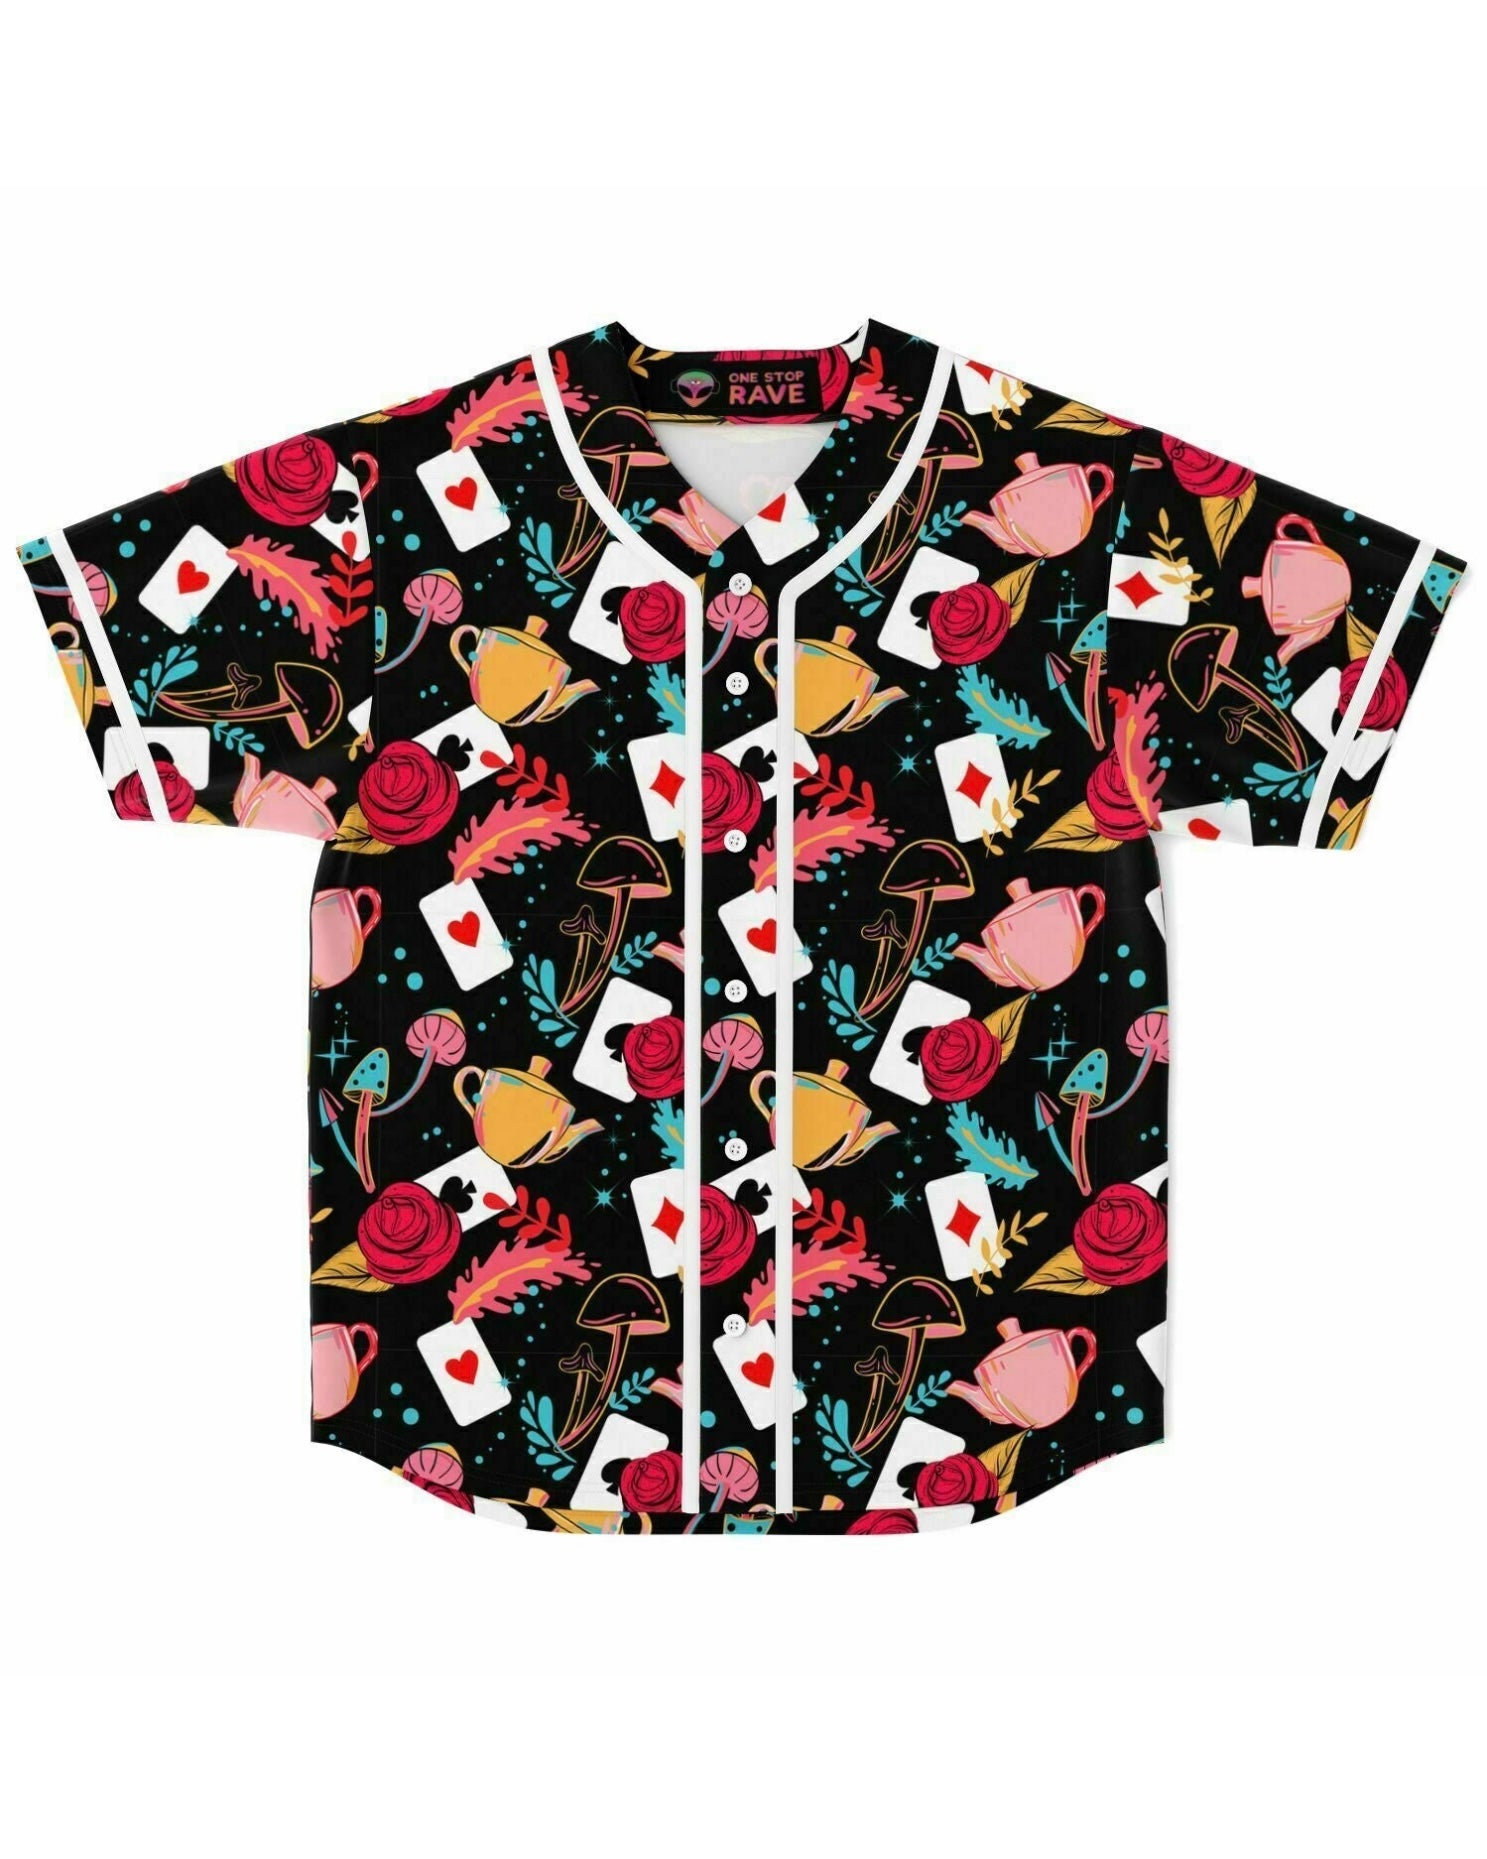 Curiouser and Curiouser Jersey, Baseball Jersey, - One Stop Rave